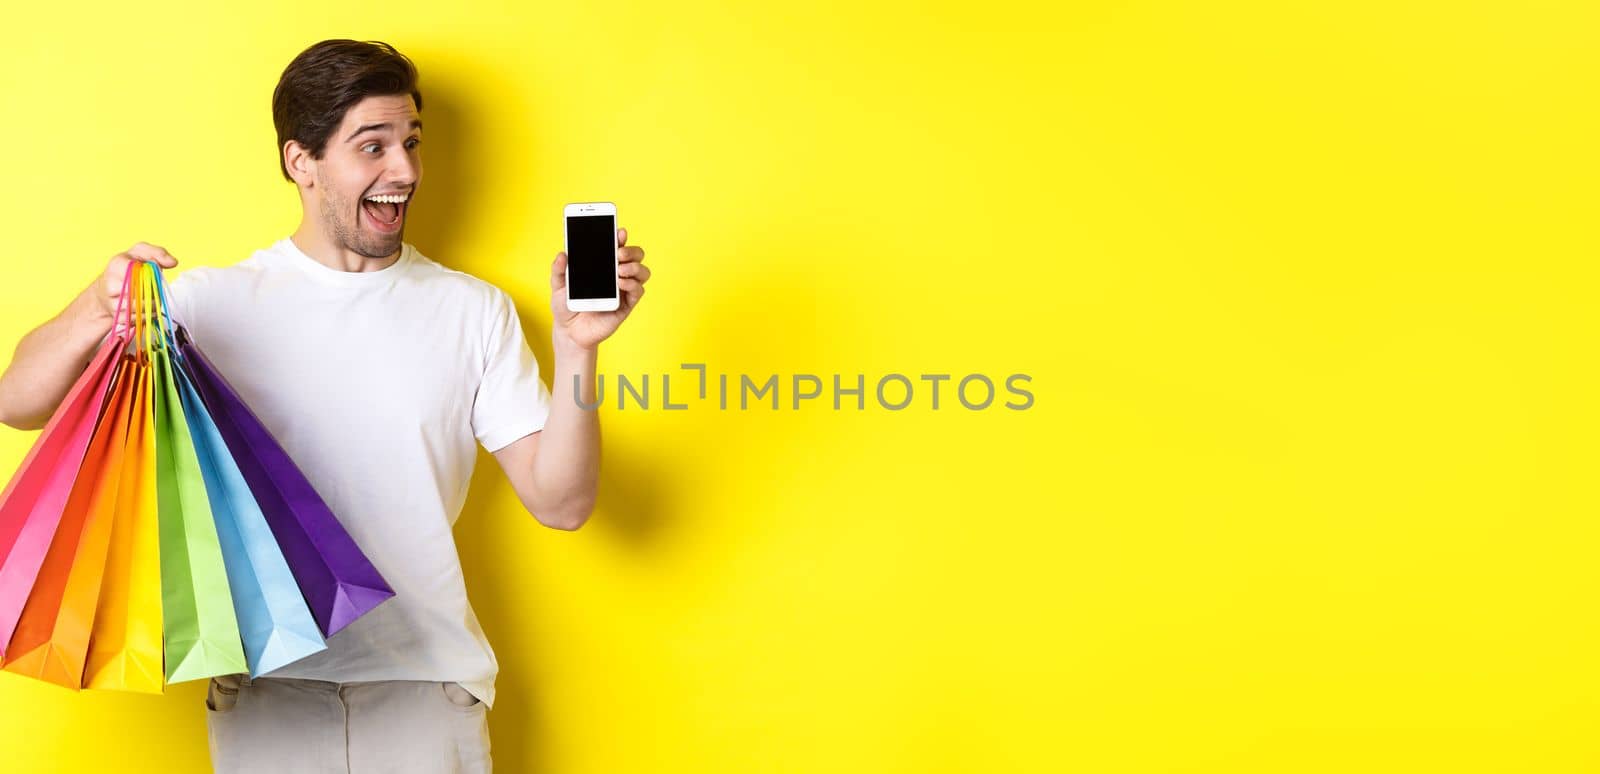 Young man holding shopping bags and showing mobile phone screen, money application, standing over yellow background.